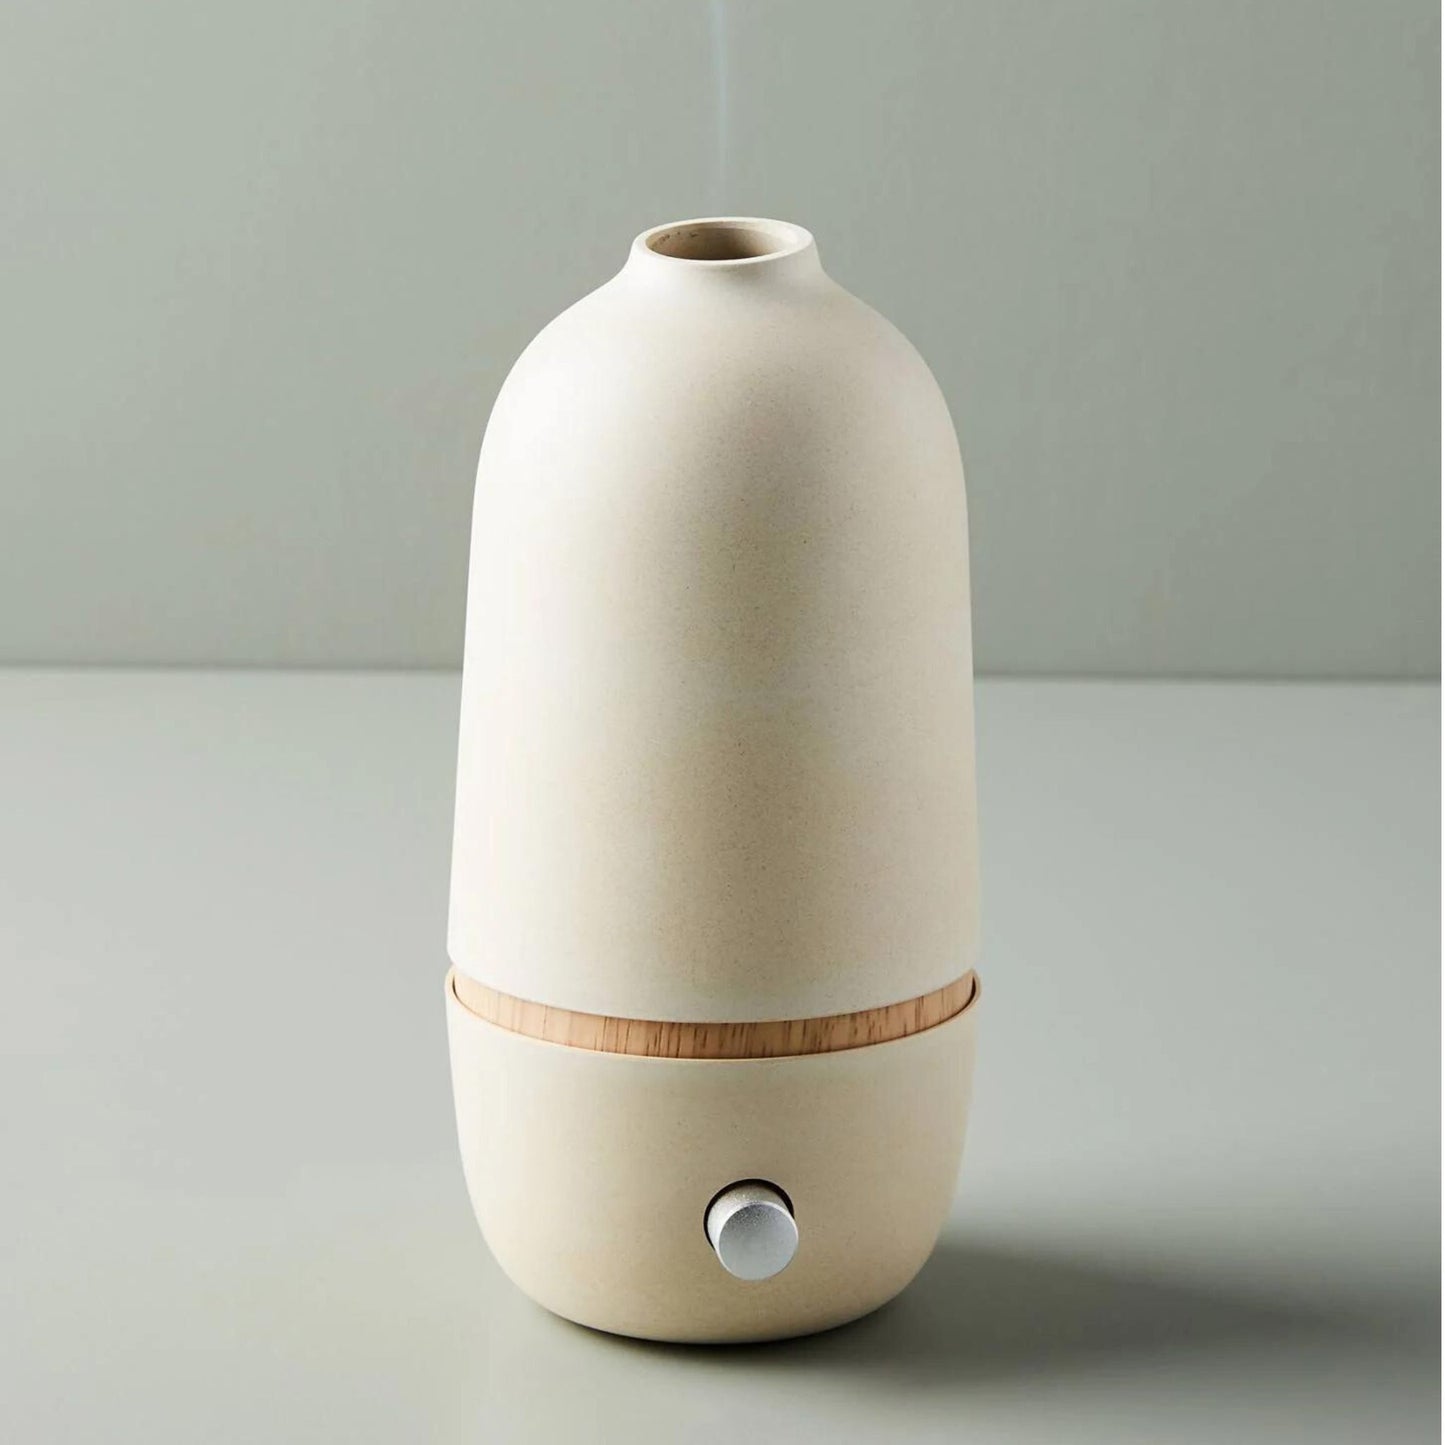 ONA diffuser of essential oils by nebulization - Unik by Nature